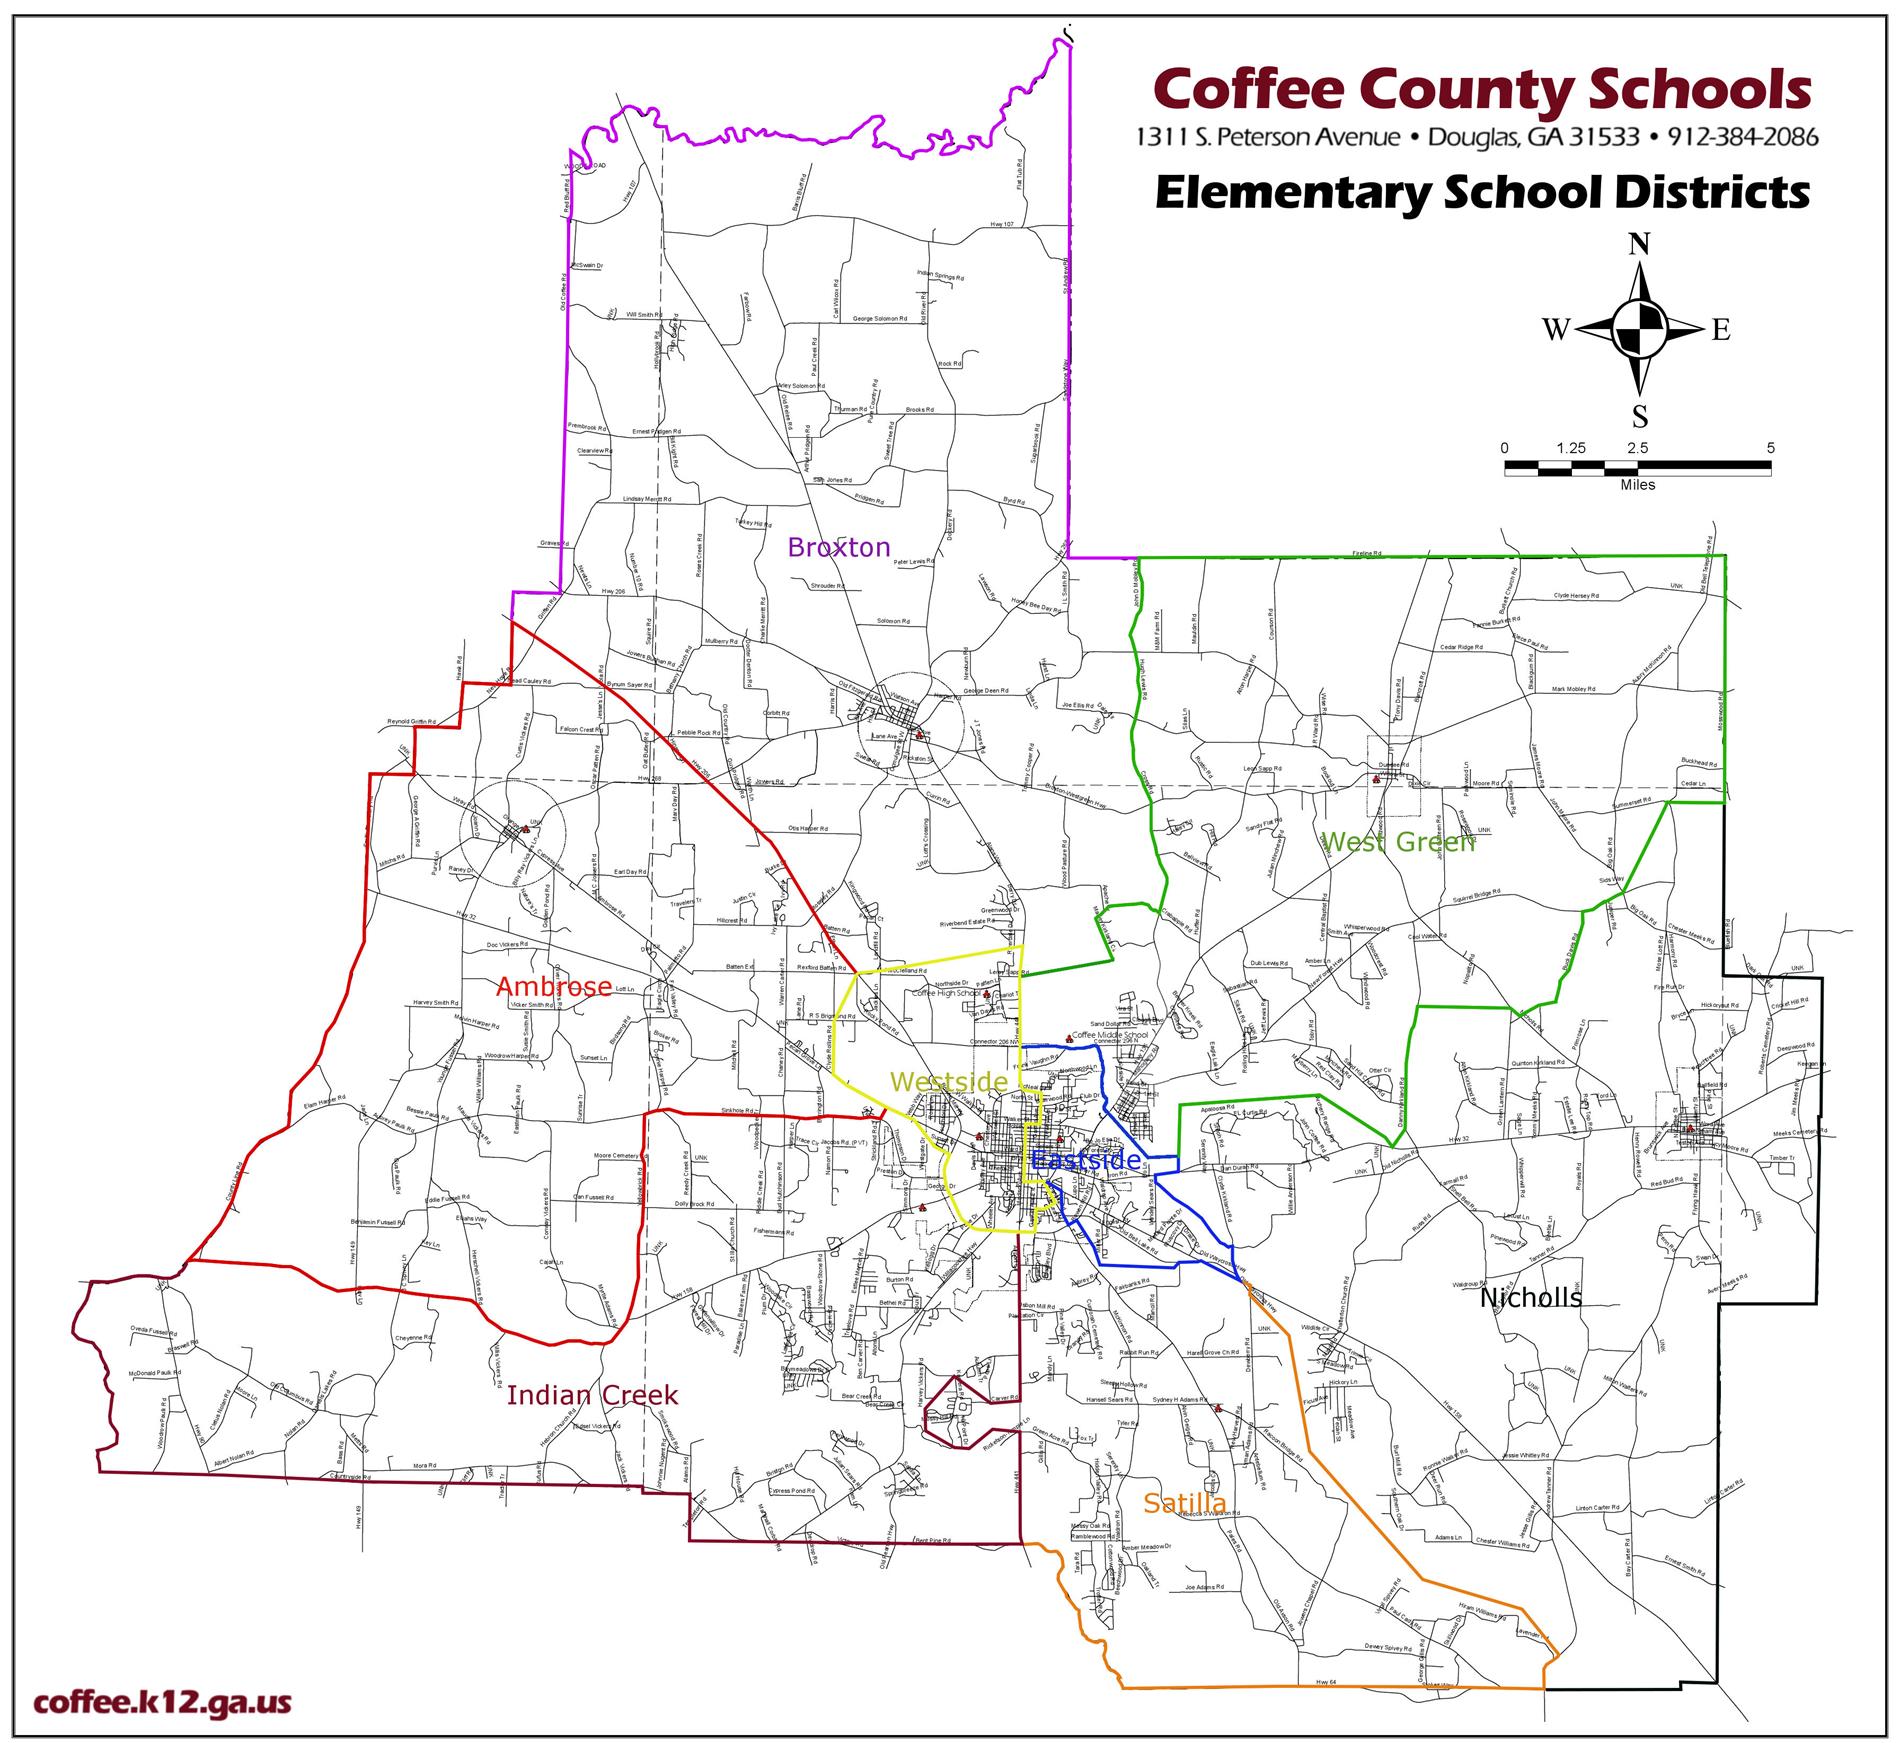 Coffee County Schools Elementary School Districts